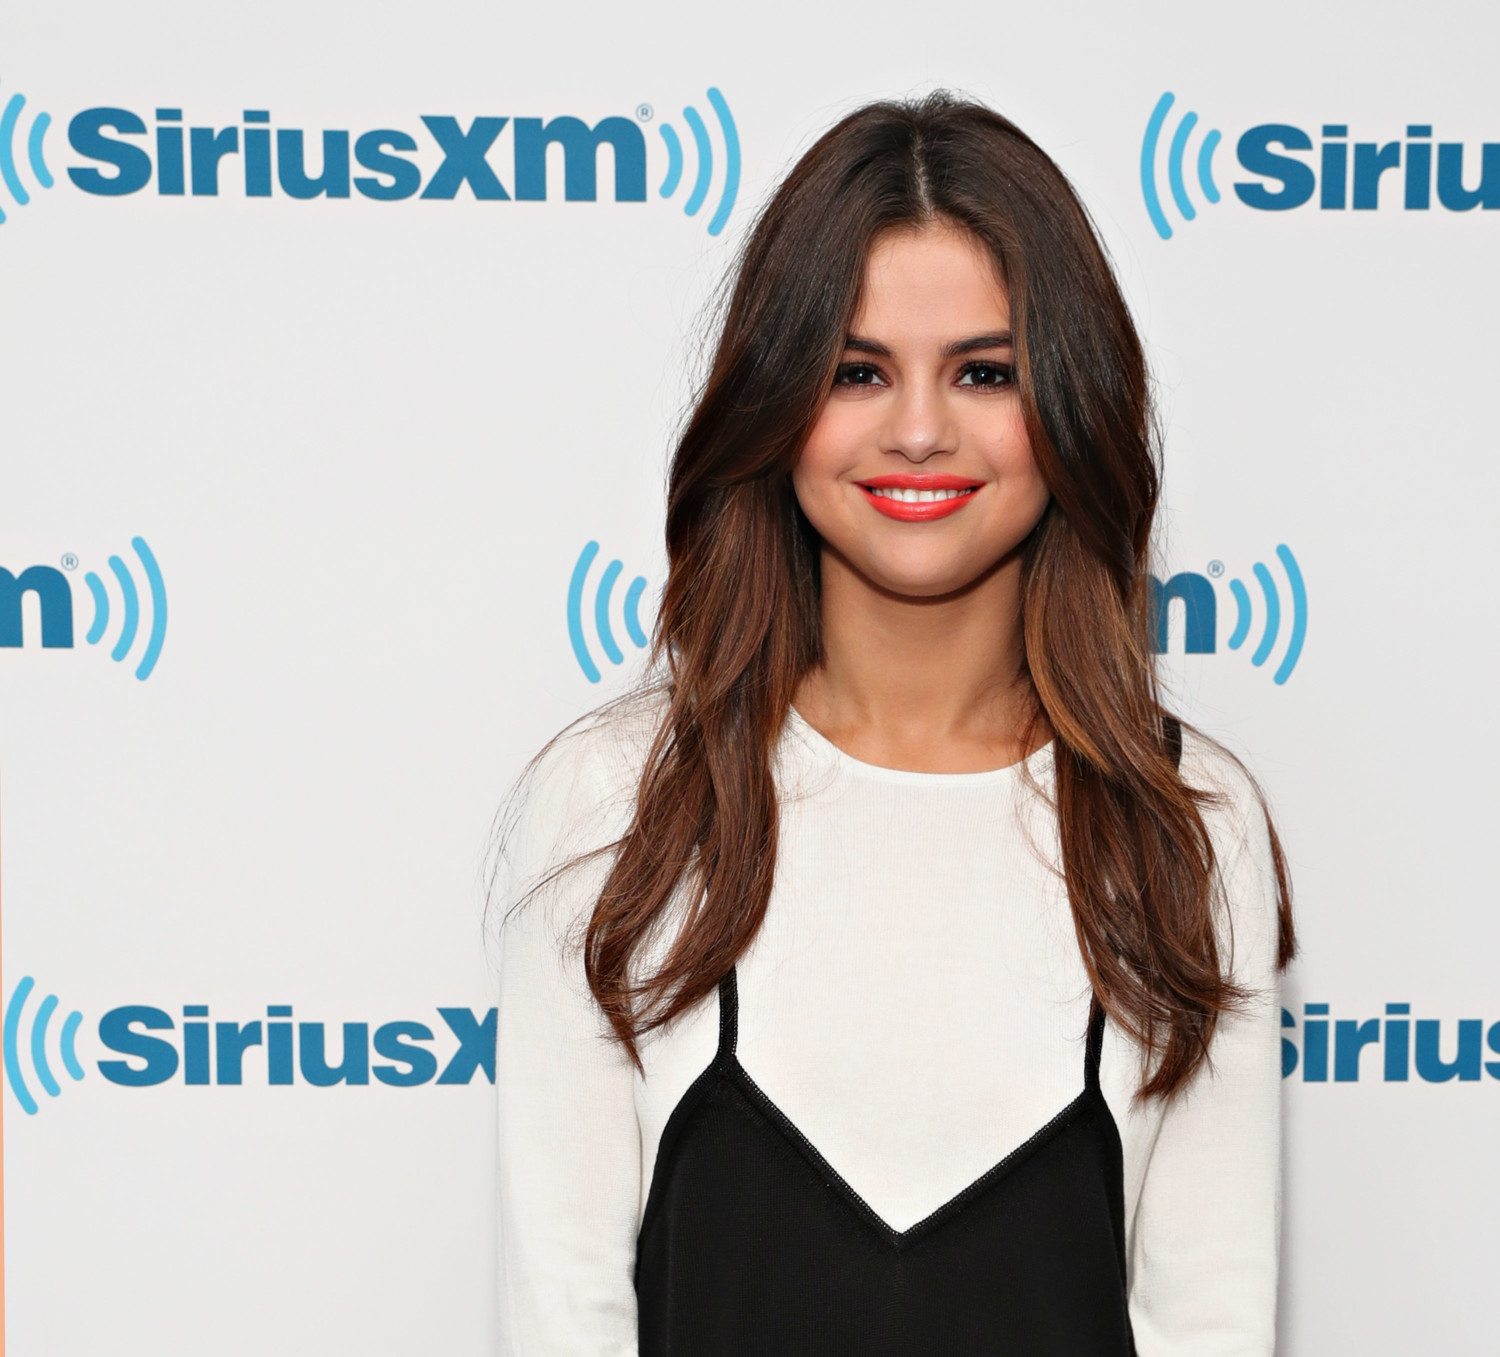 Selena Gomez Visits 'The Morning Mash Up' On SiriusXM Hits 1 Channel At The SiriusXM Studios In New York